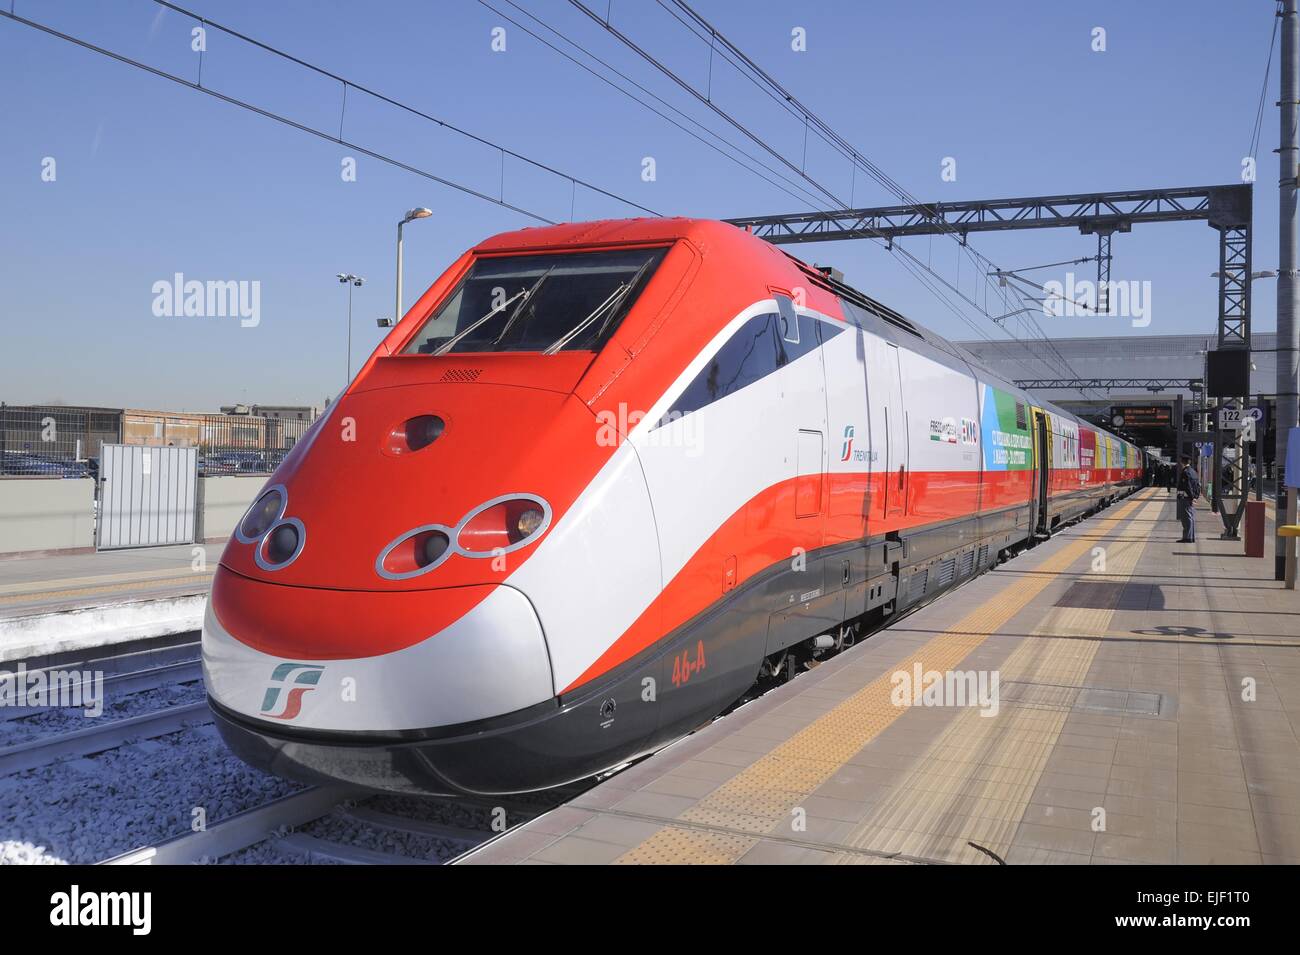 Milan, connection with high-speed train Trenitalia Frecciarossa in the Rho Fiera station for Universal  EXPO 2015 Stock Photo